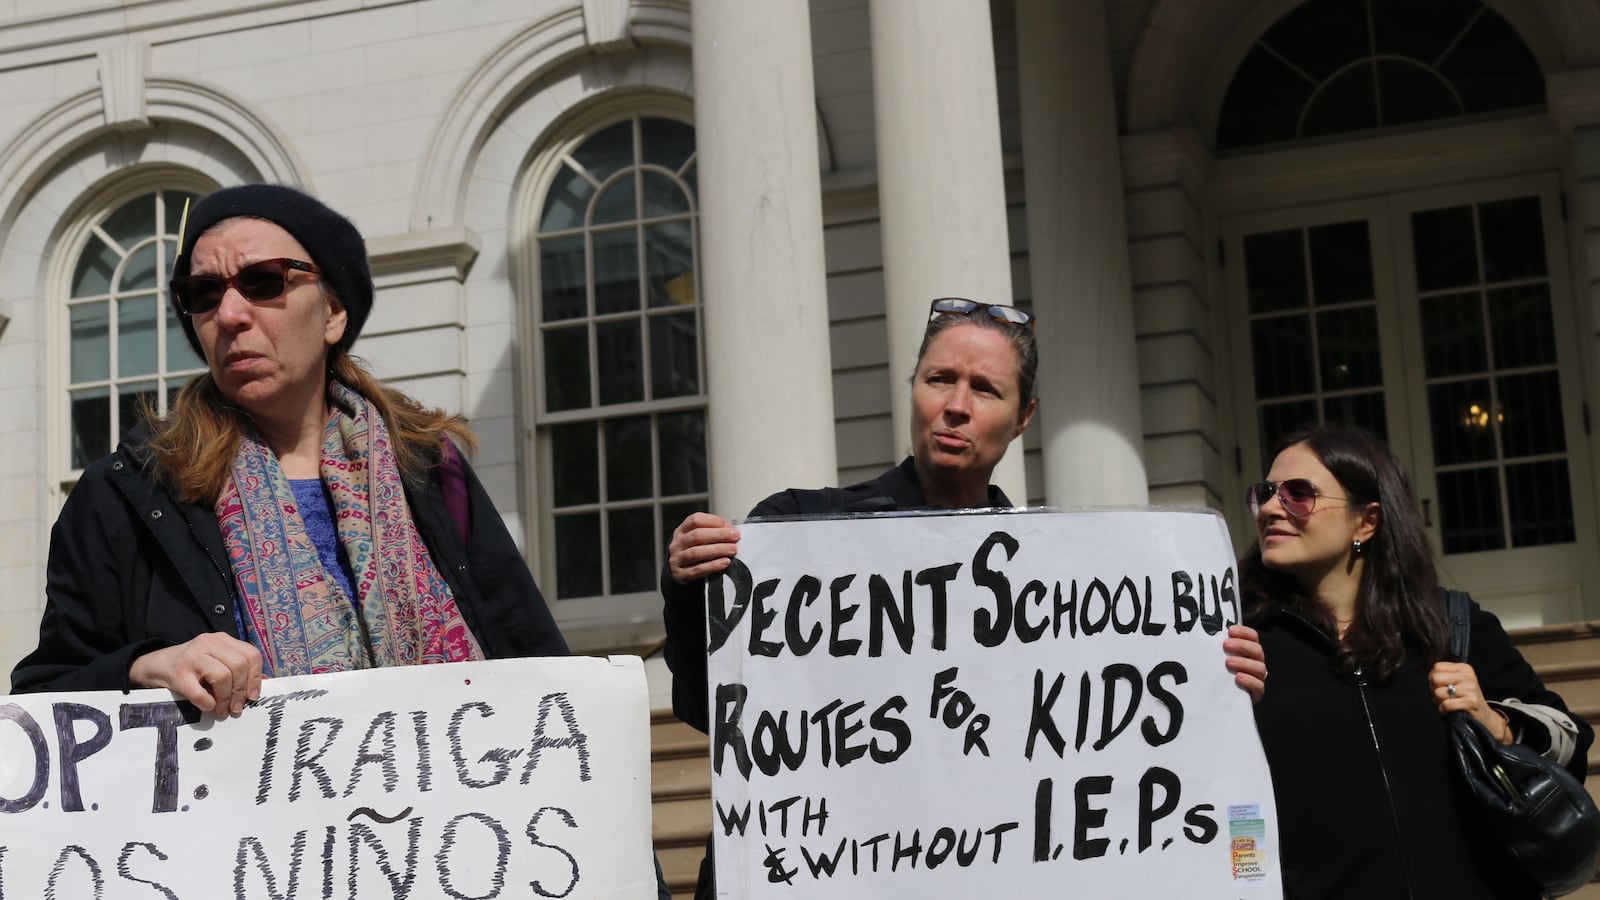 Parents gathered at a press conference outside City Hall to share their horror stories regarding New York City school bus services.